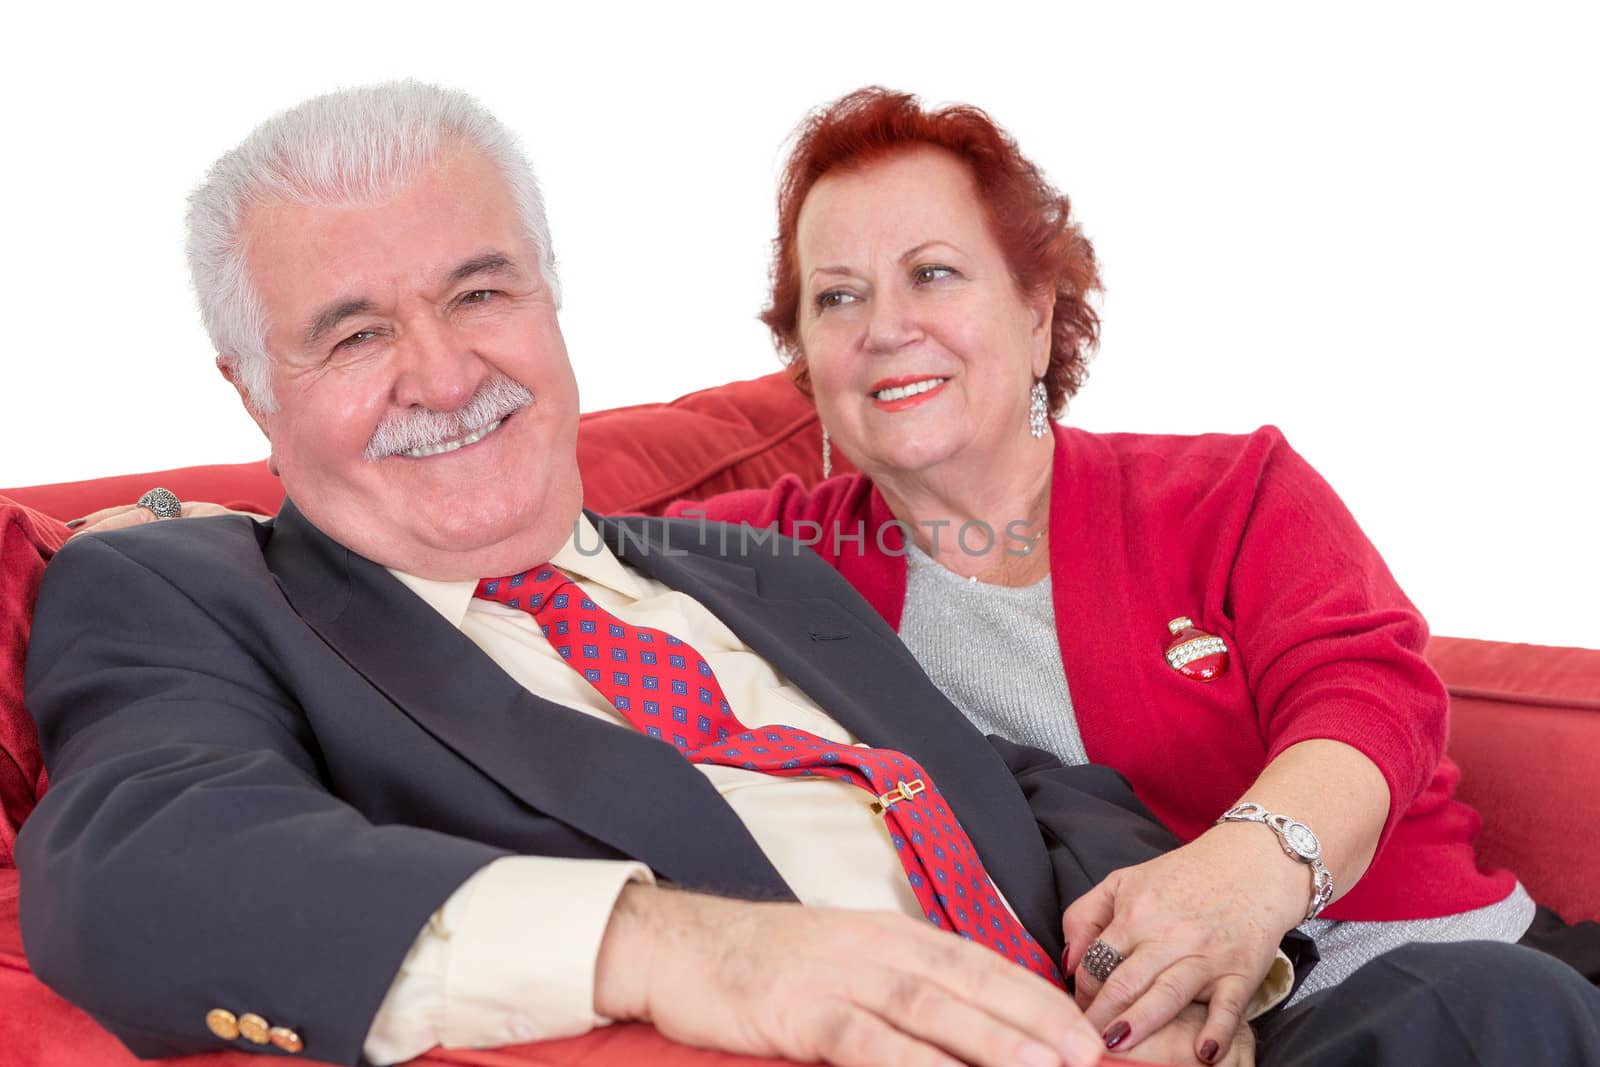 Devoted senior couple seated on a red sofa holding hands with the wife looking lovingly at her husband as he gives the camera a beaming smile